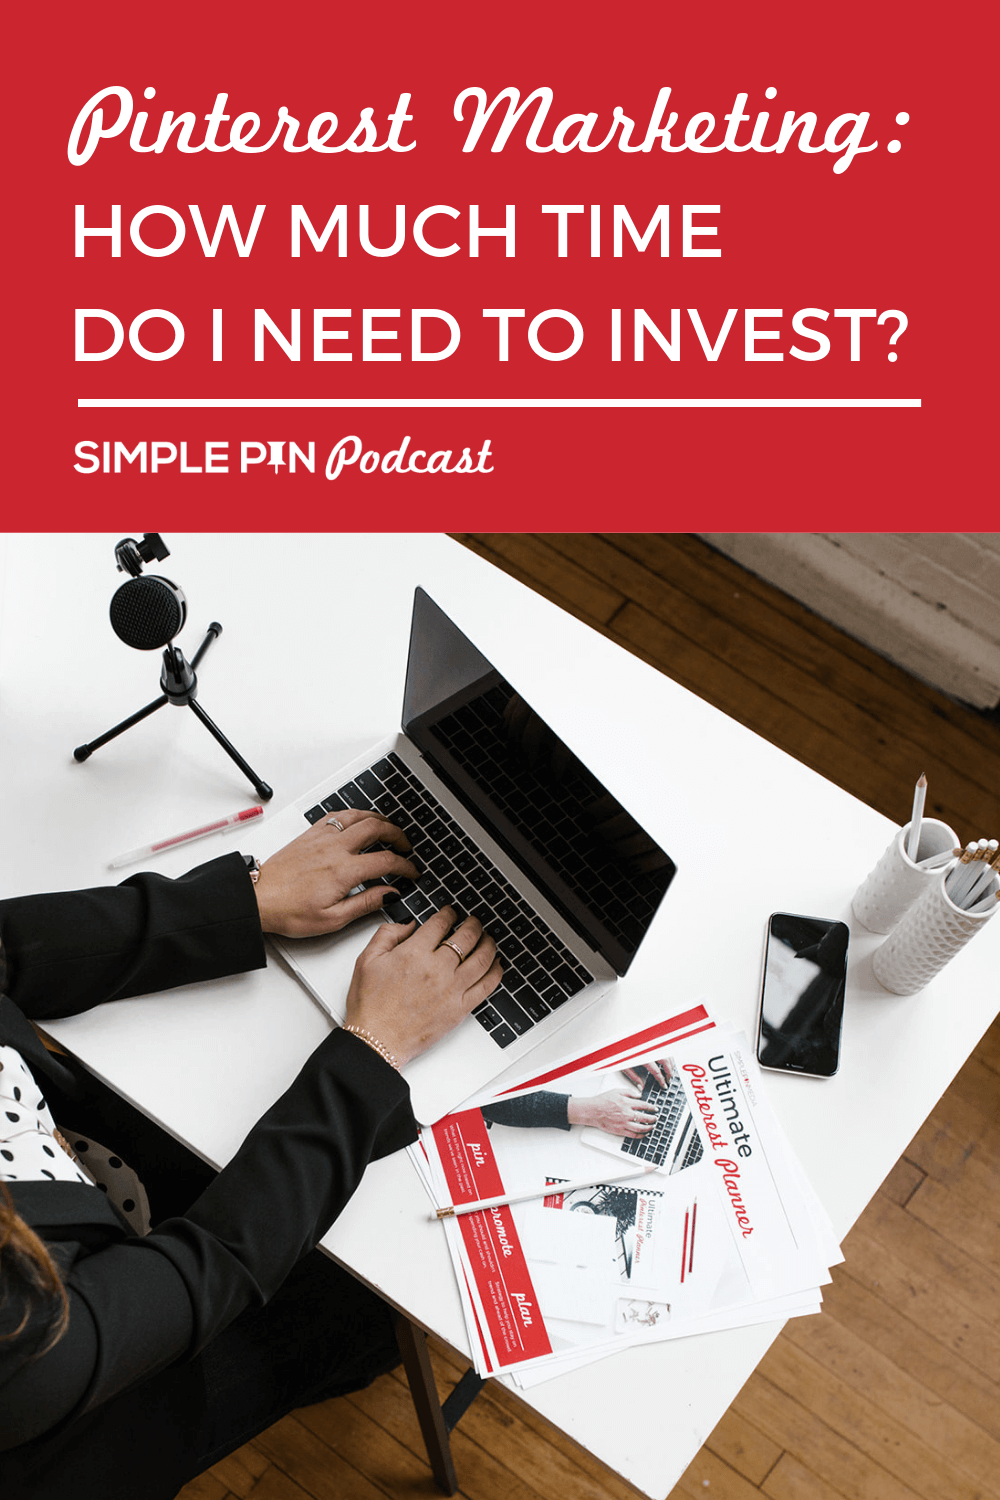 155 How Much Time Do I Need To Invest In Pinterest Marketing